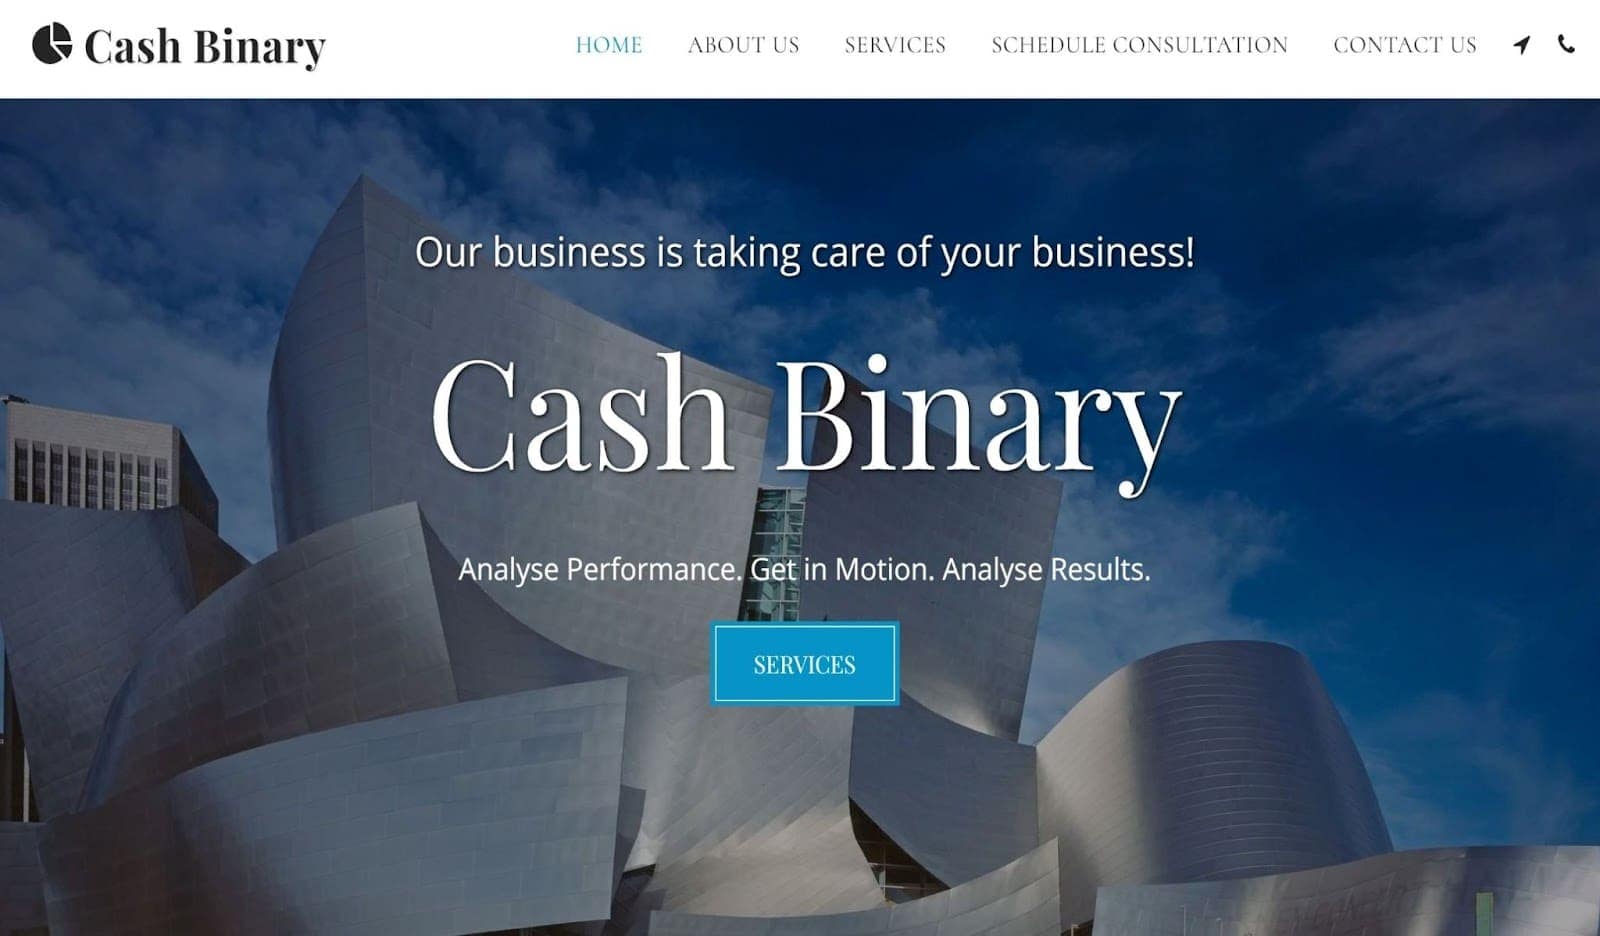 There’s nothing flashy about Cash Binary – the focus is on persuasive content. Hover to see!